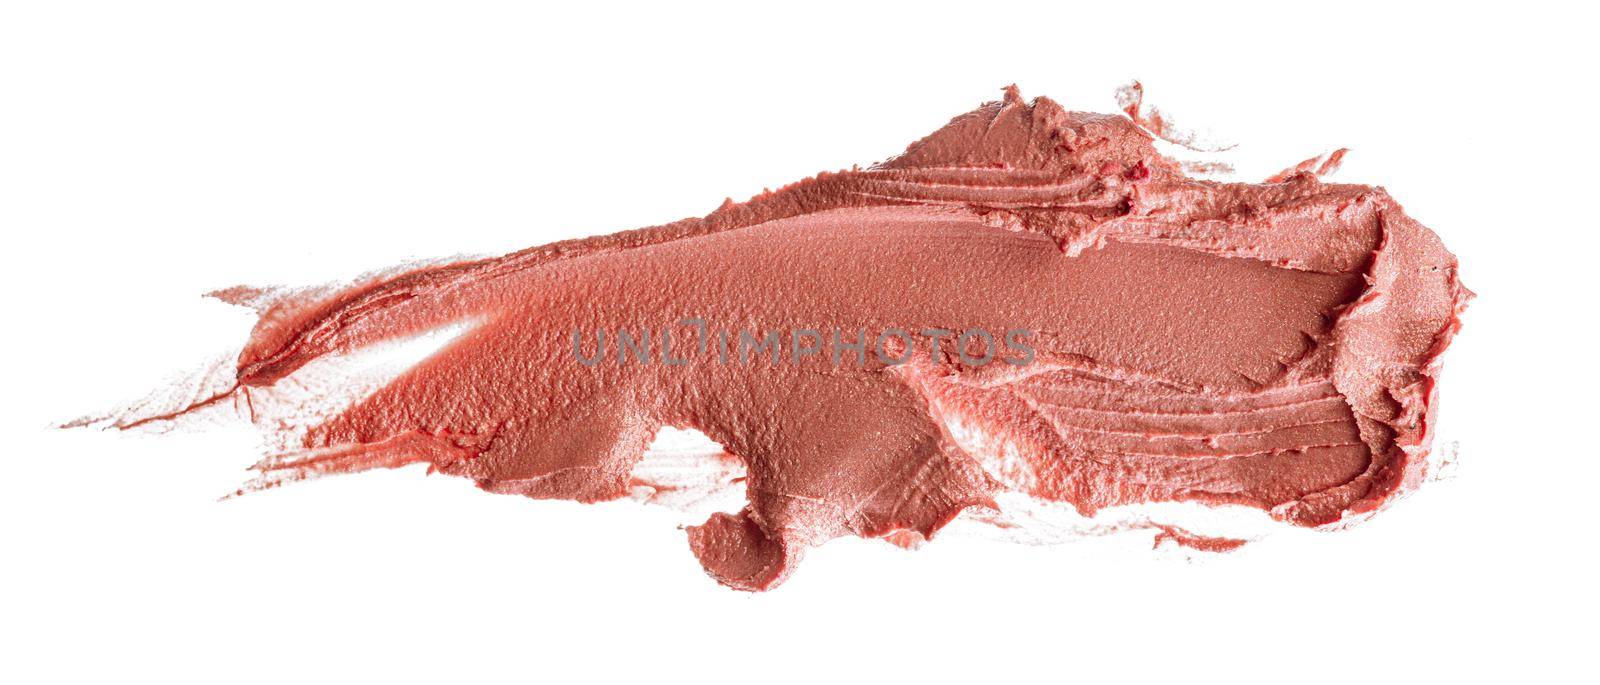 Stains of a pink lipstick isolated on white background by Fabrikasimf